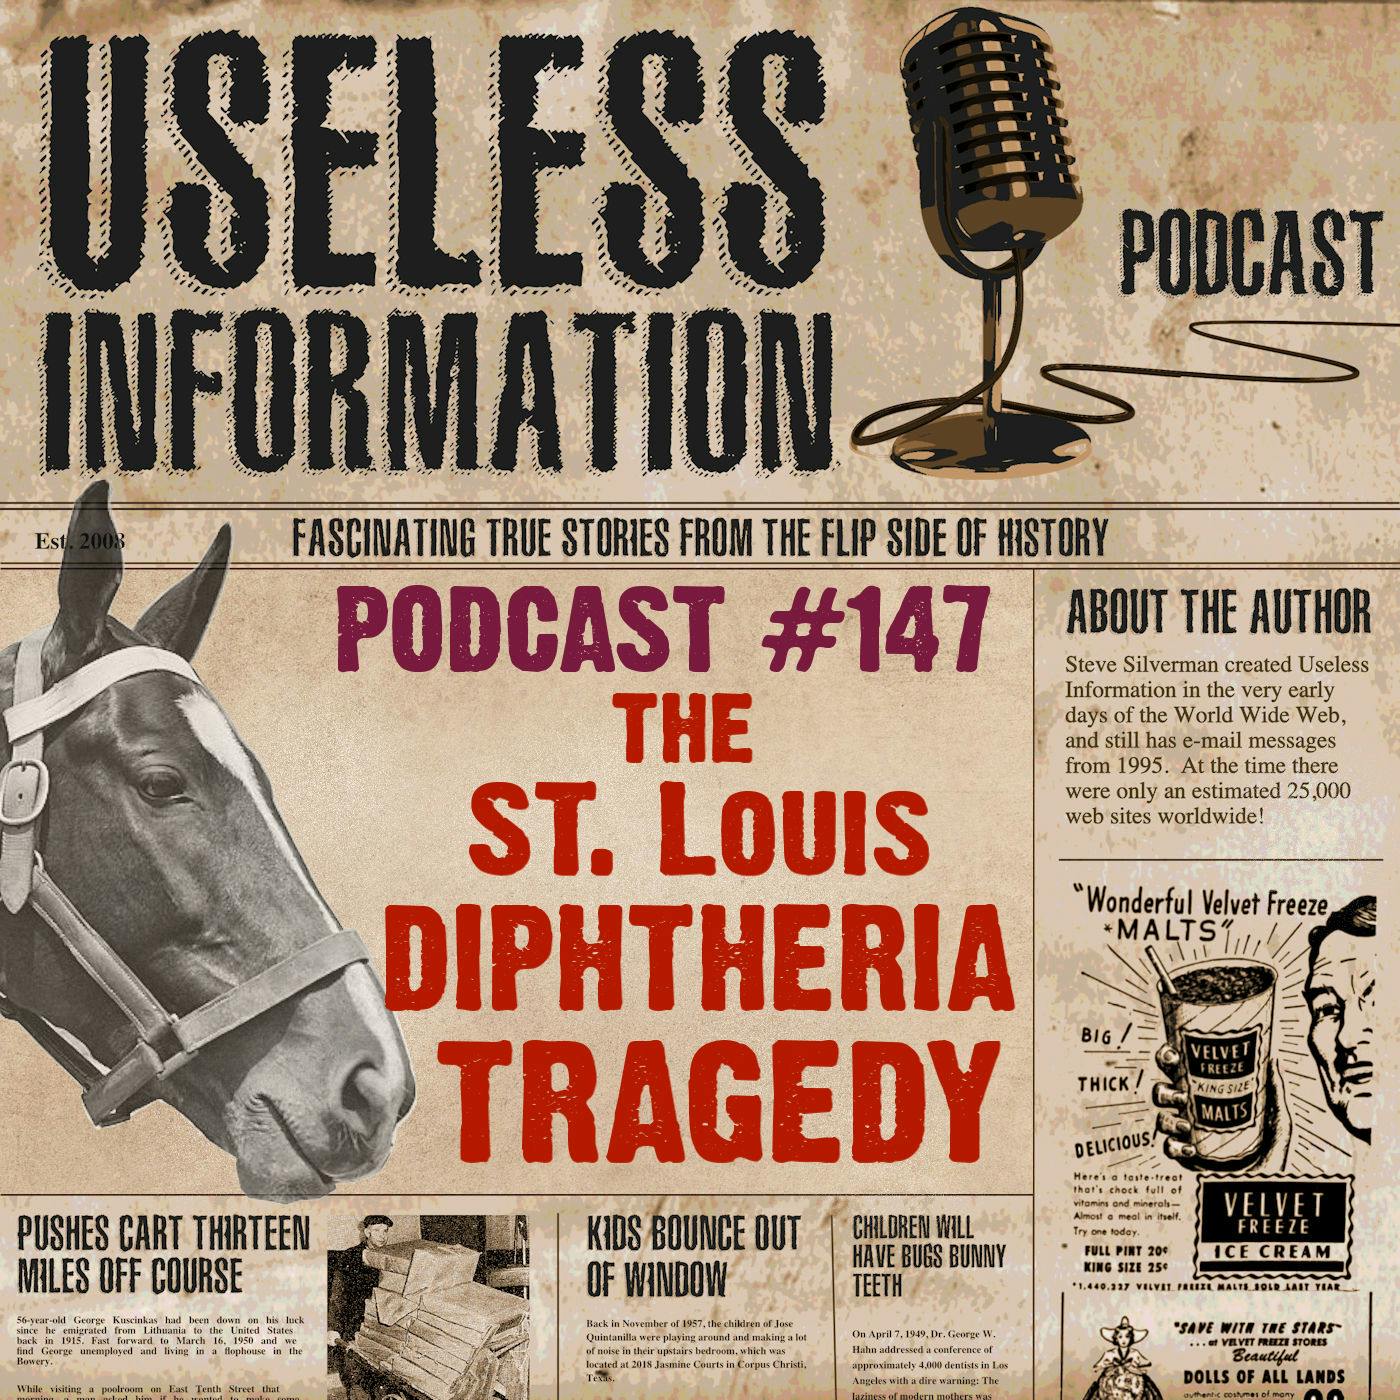 The St. Louis Diphtheria Tragedy  - UI Podcast #147